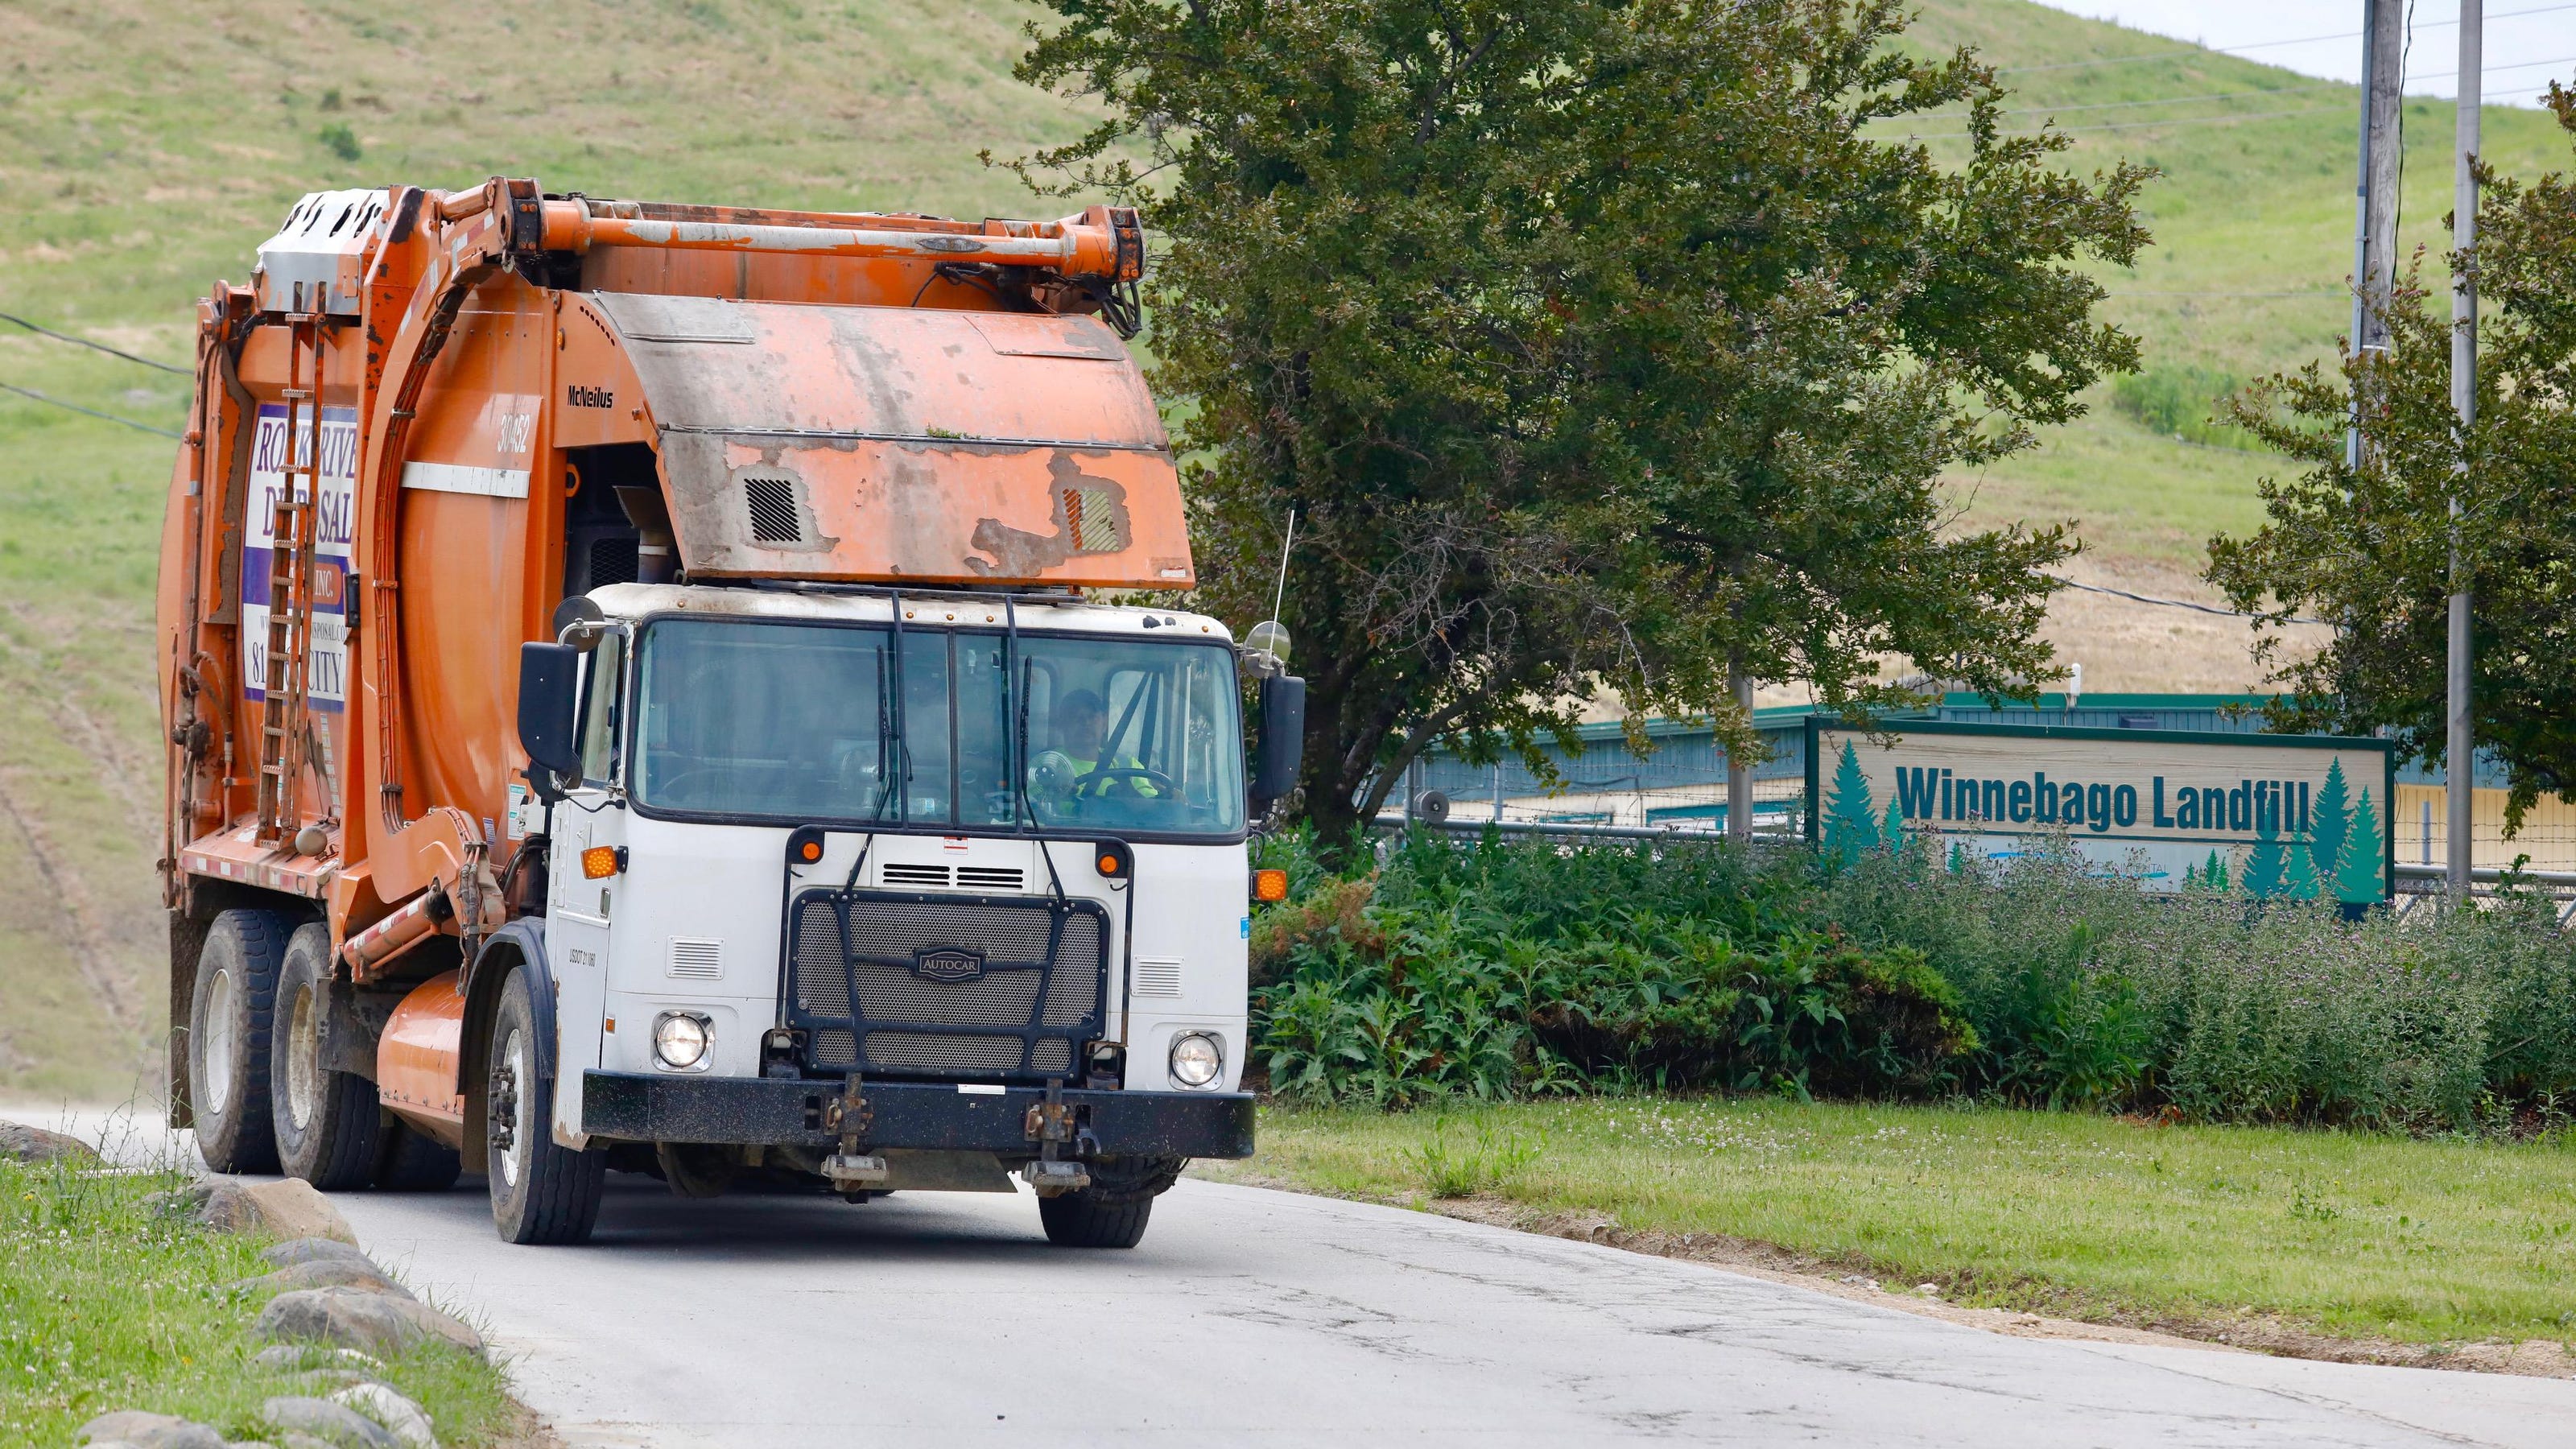 Yard waste collection in Rockford to resume as virus hits hauler